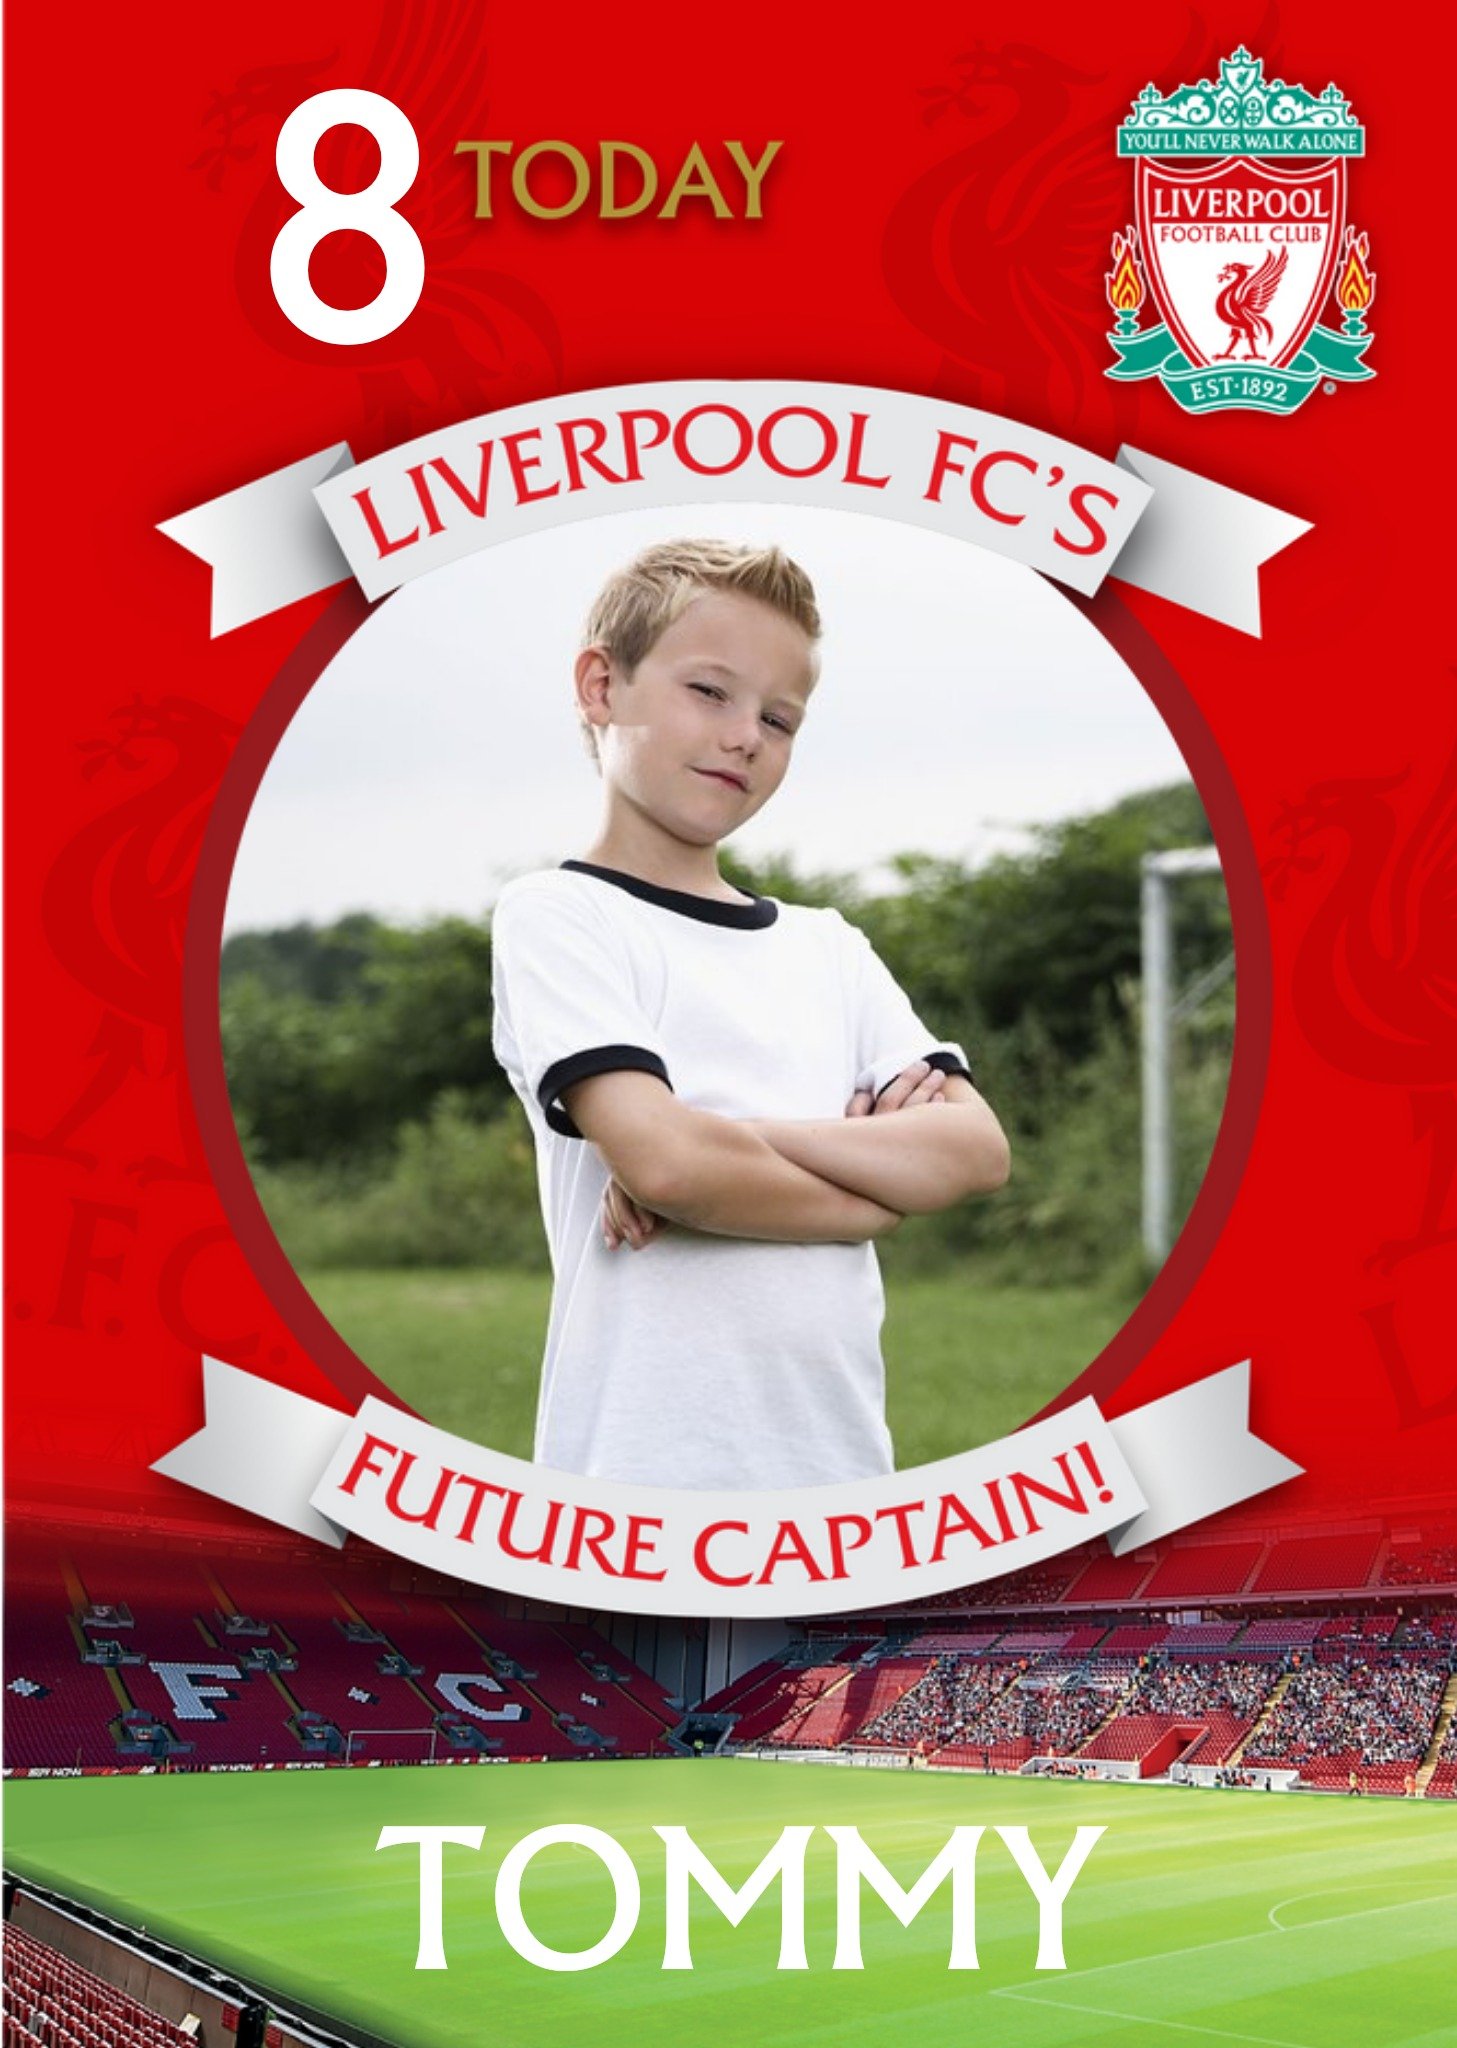 Liverpool Fc Birthday Card - Liverpool Fc's Future Captain, Large